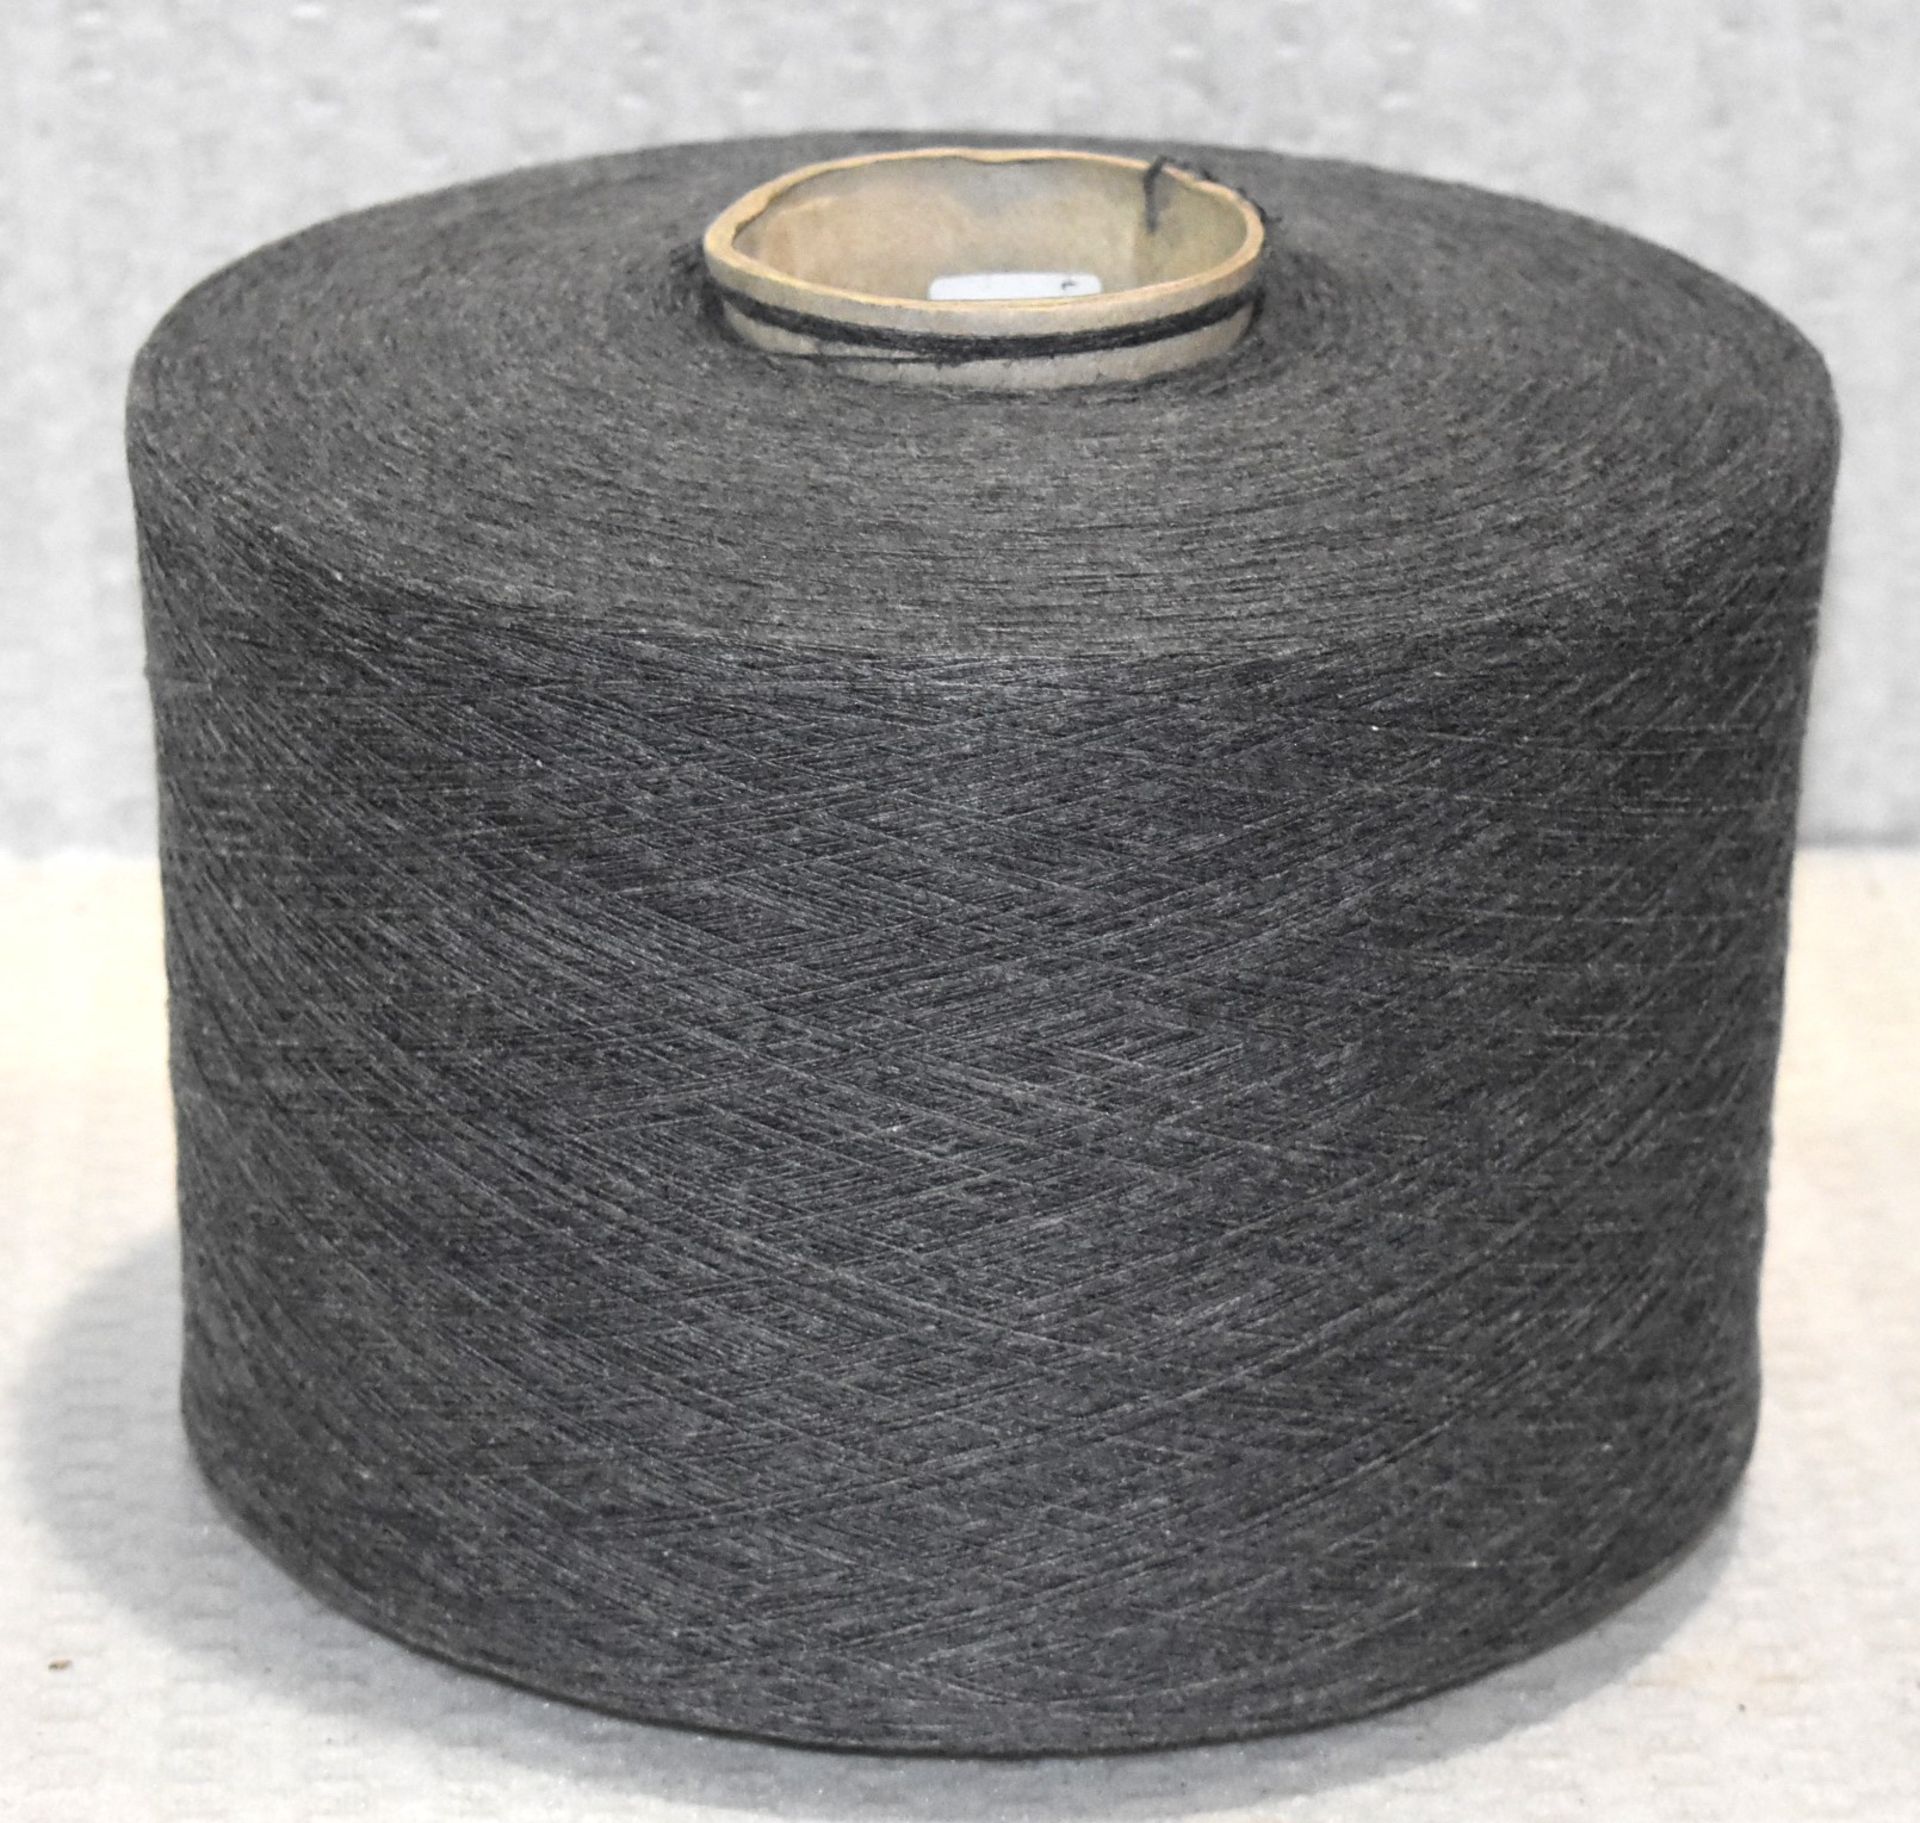 18 x Cones of 1/13 MicroCotton Knitting Yarn - Mid Grey - Approx Weight: 2,500g - New Stock ABL Yarn - Image 7 of 16